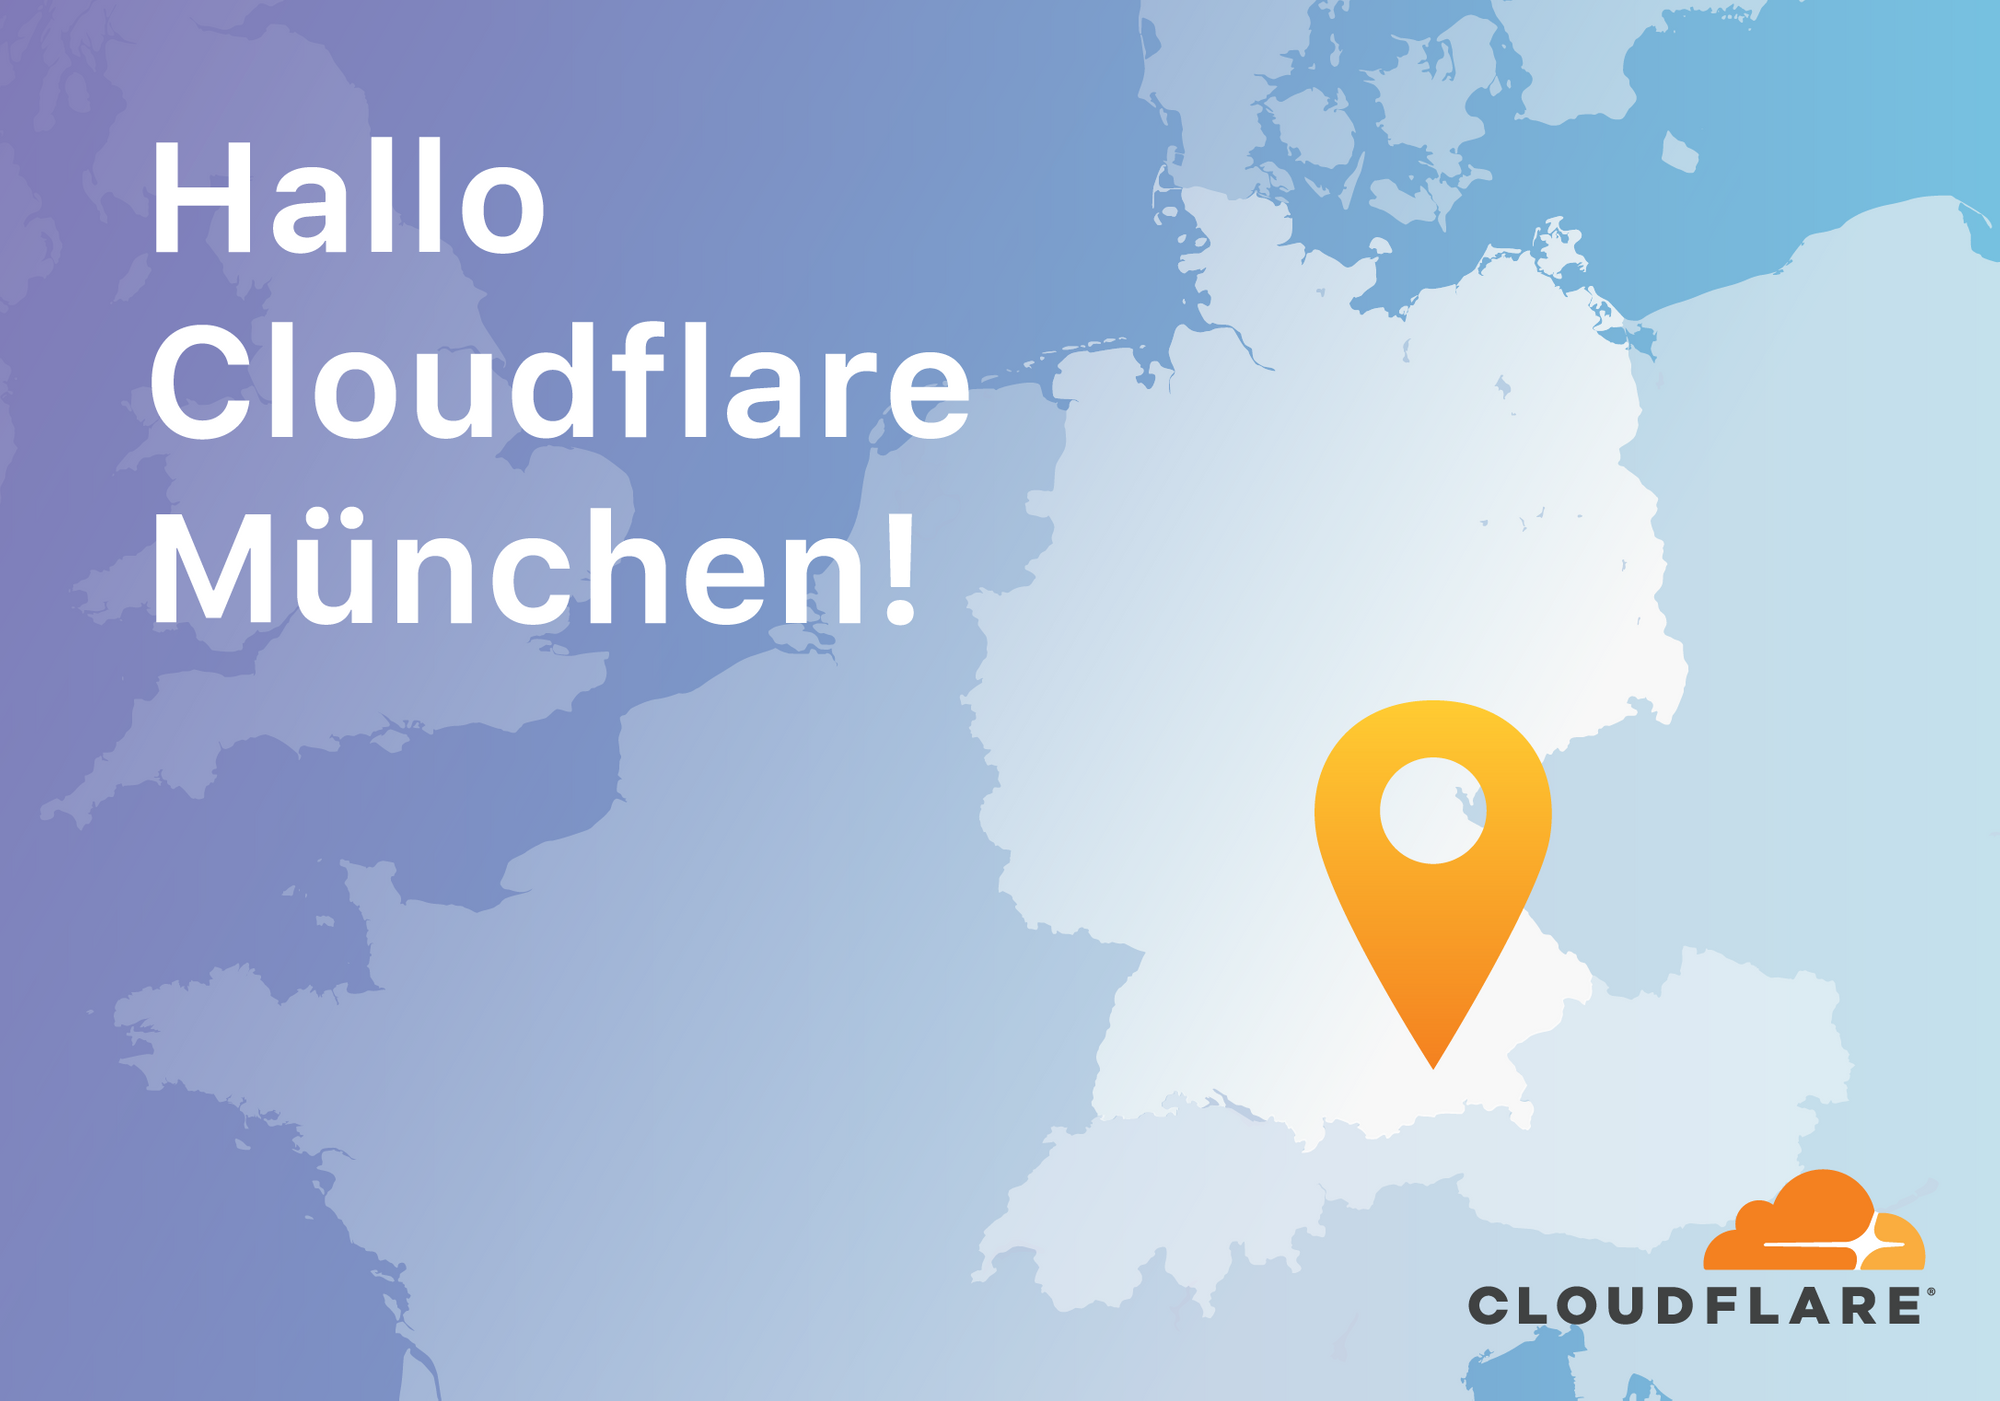 Why I’m helping Cloudflare grow in Germany, Austria, and Switzerland